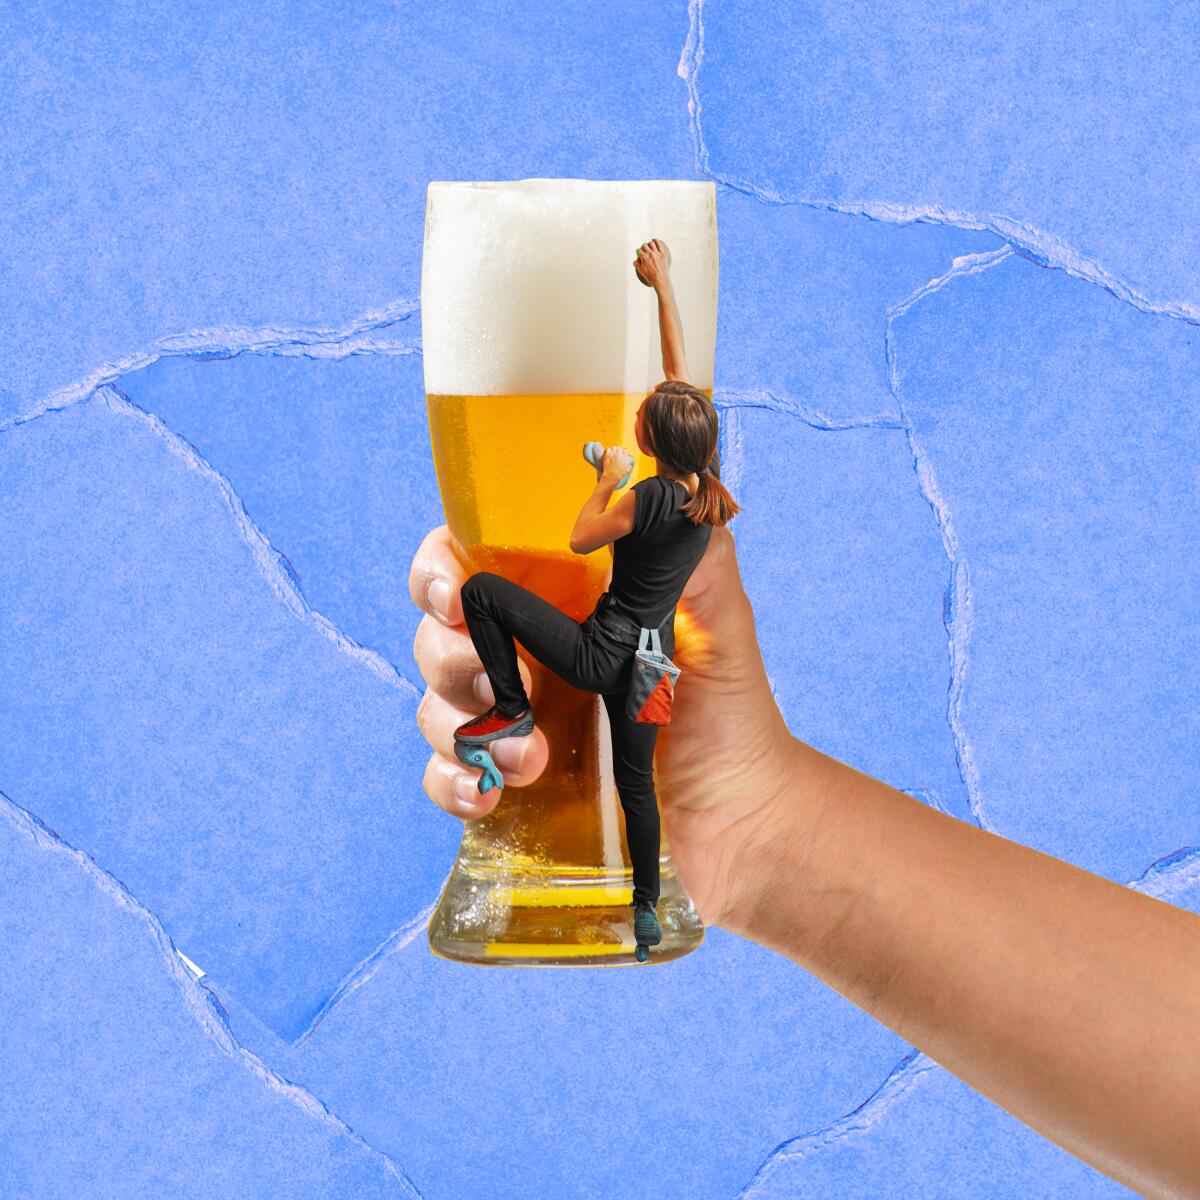 An illustration of a hand holding a glass of beer with a miniature climber bouldering the side of the glass.